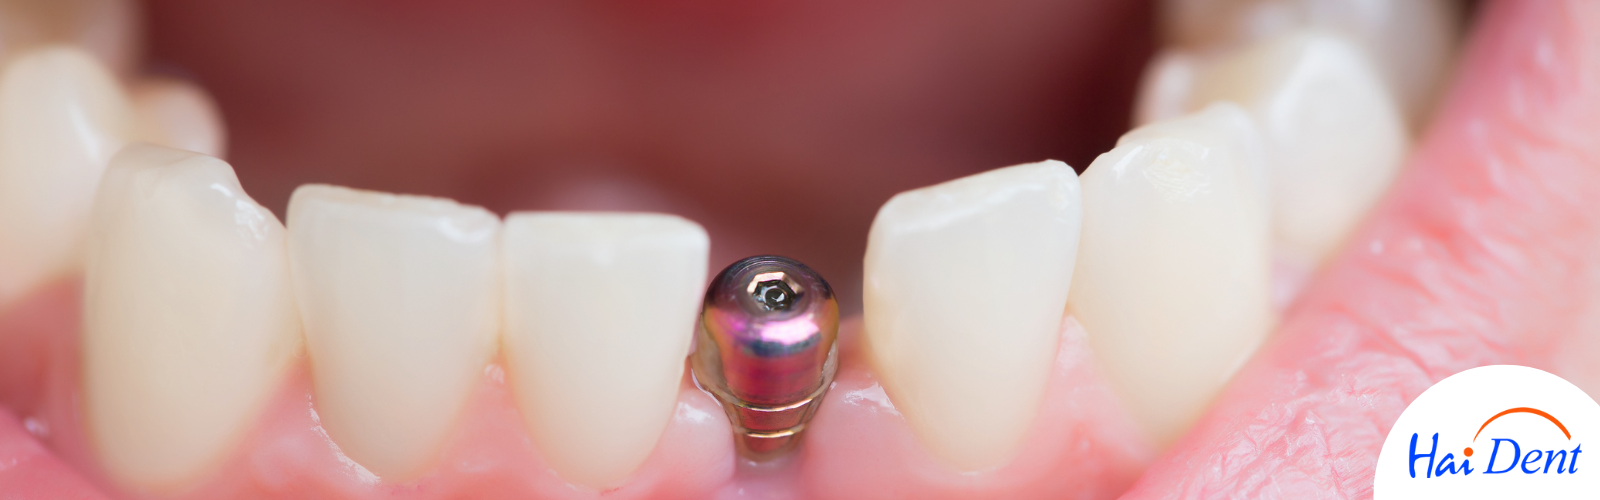 SINGLE TOOTH IMPLANT COST IN MUMBAI